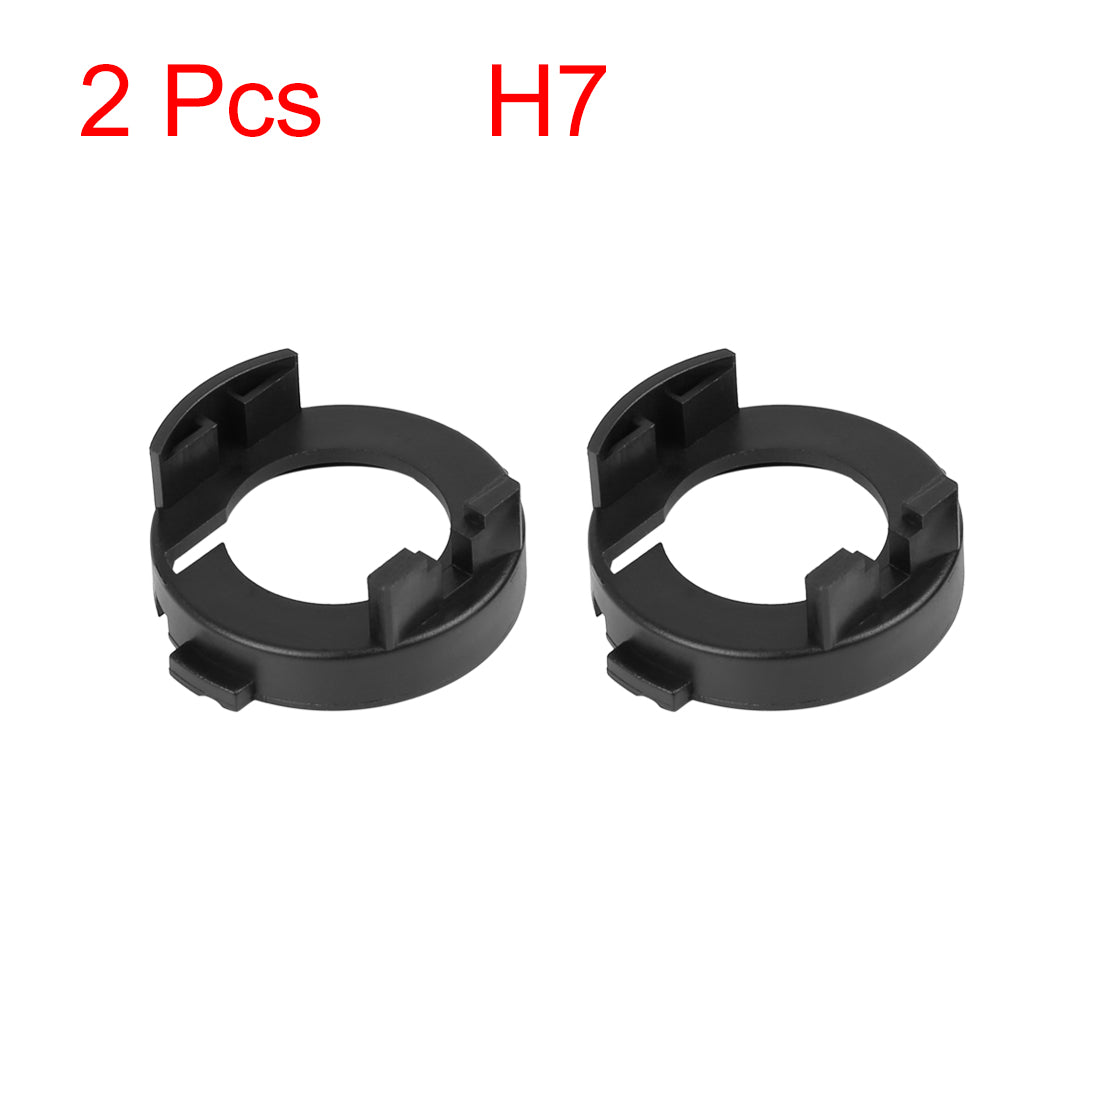 uxcell Uxcell 2 Pcs Black Plastic H7 LED Headlight Base Buckle Lamp Bulb Holder Adapter for Car Auto